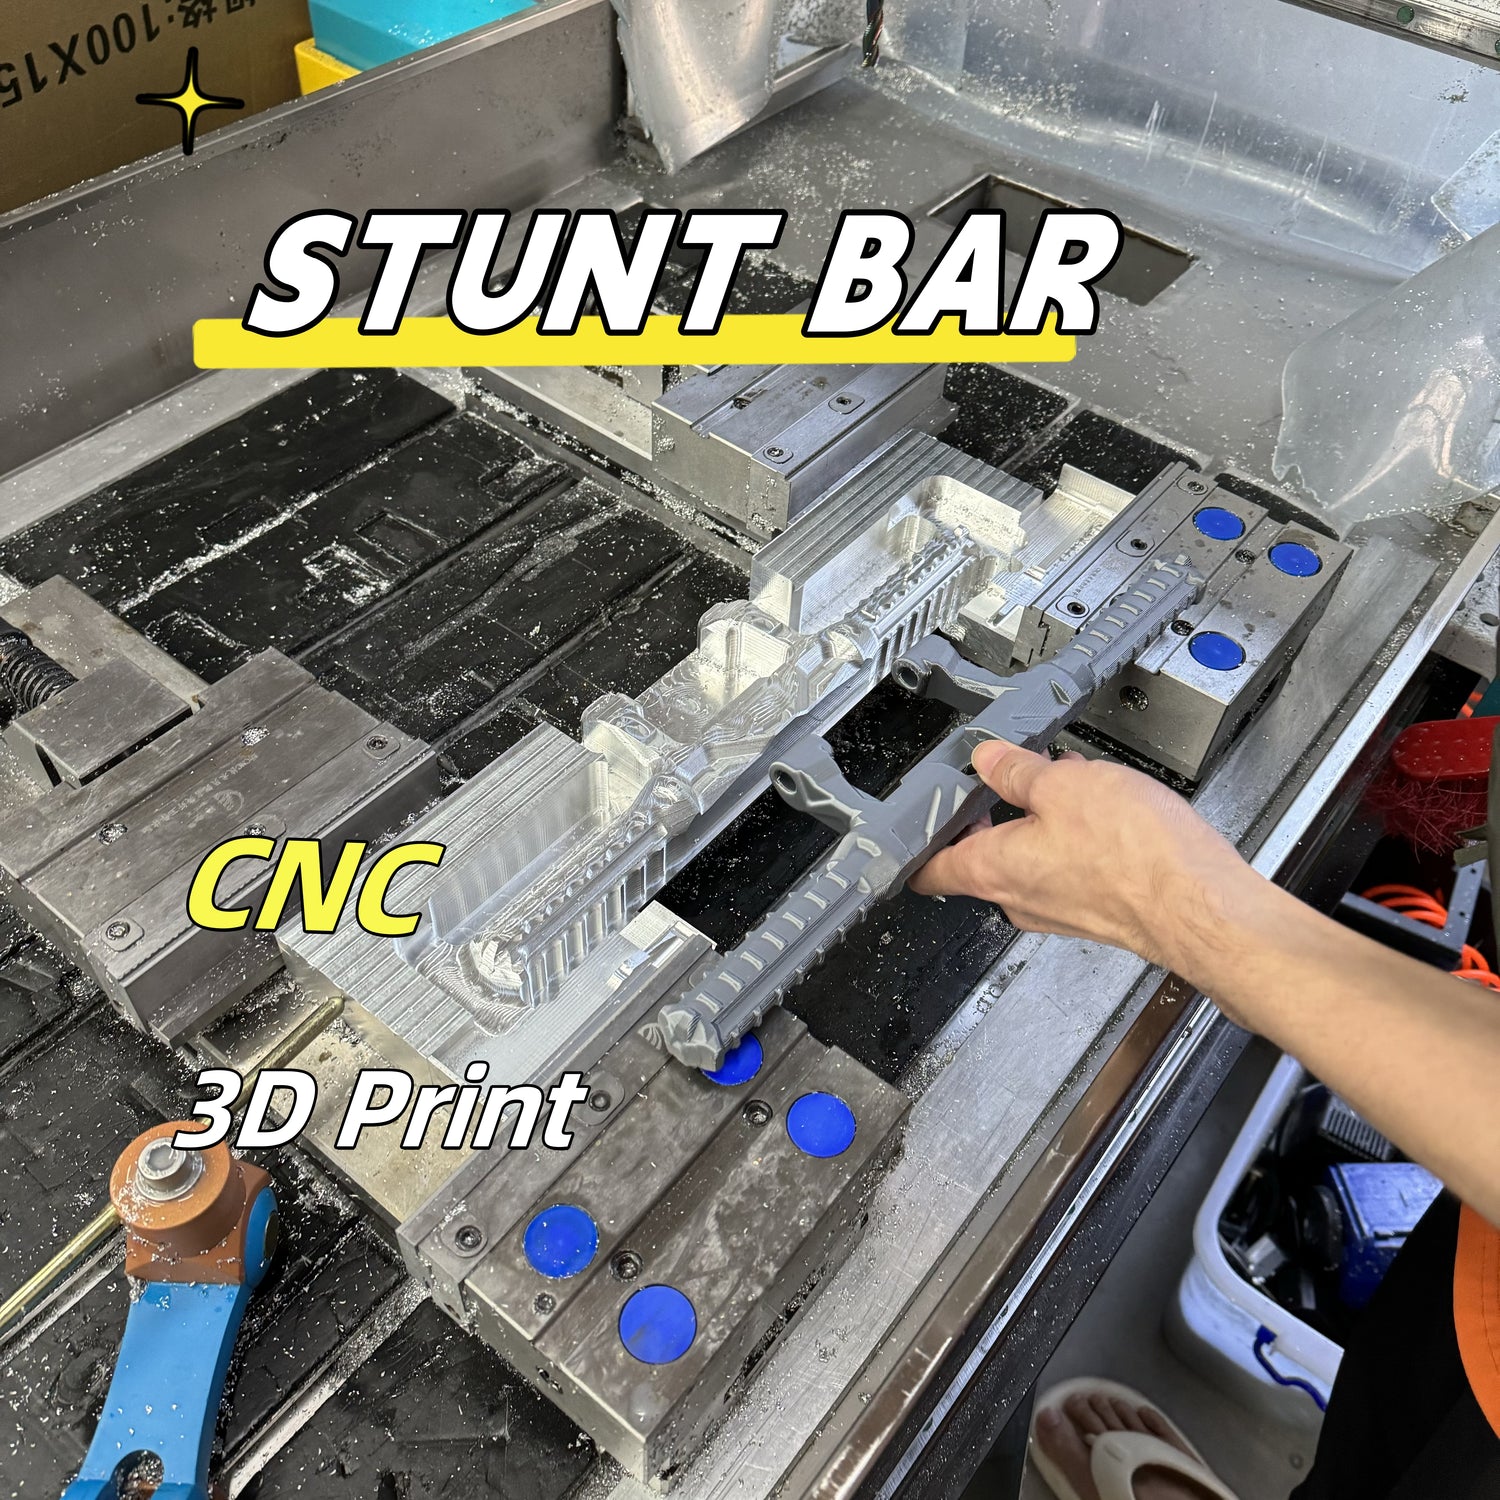 Stunt Kit Part 2! Do you know what is it?